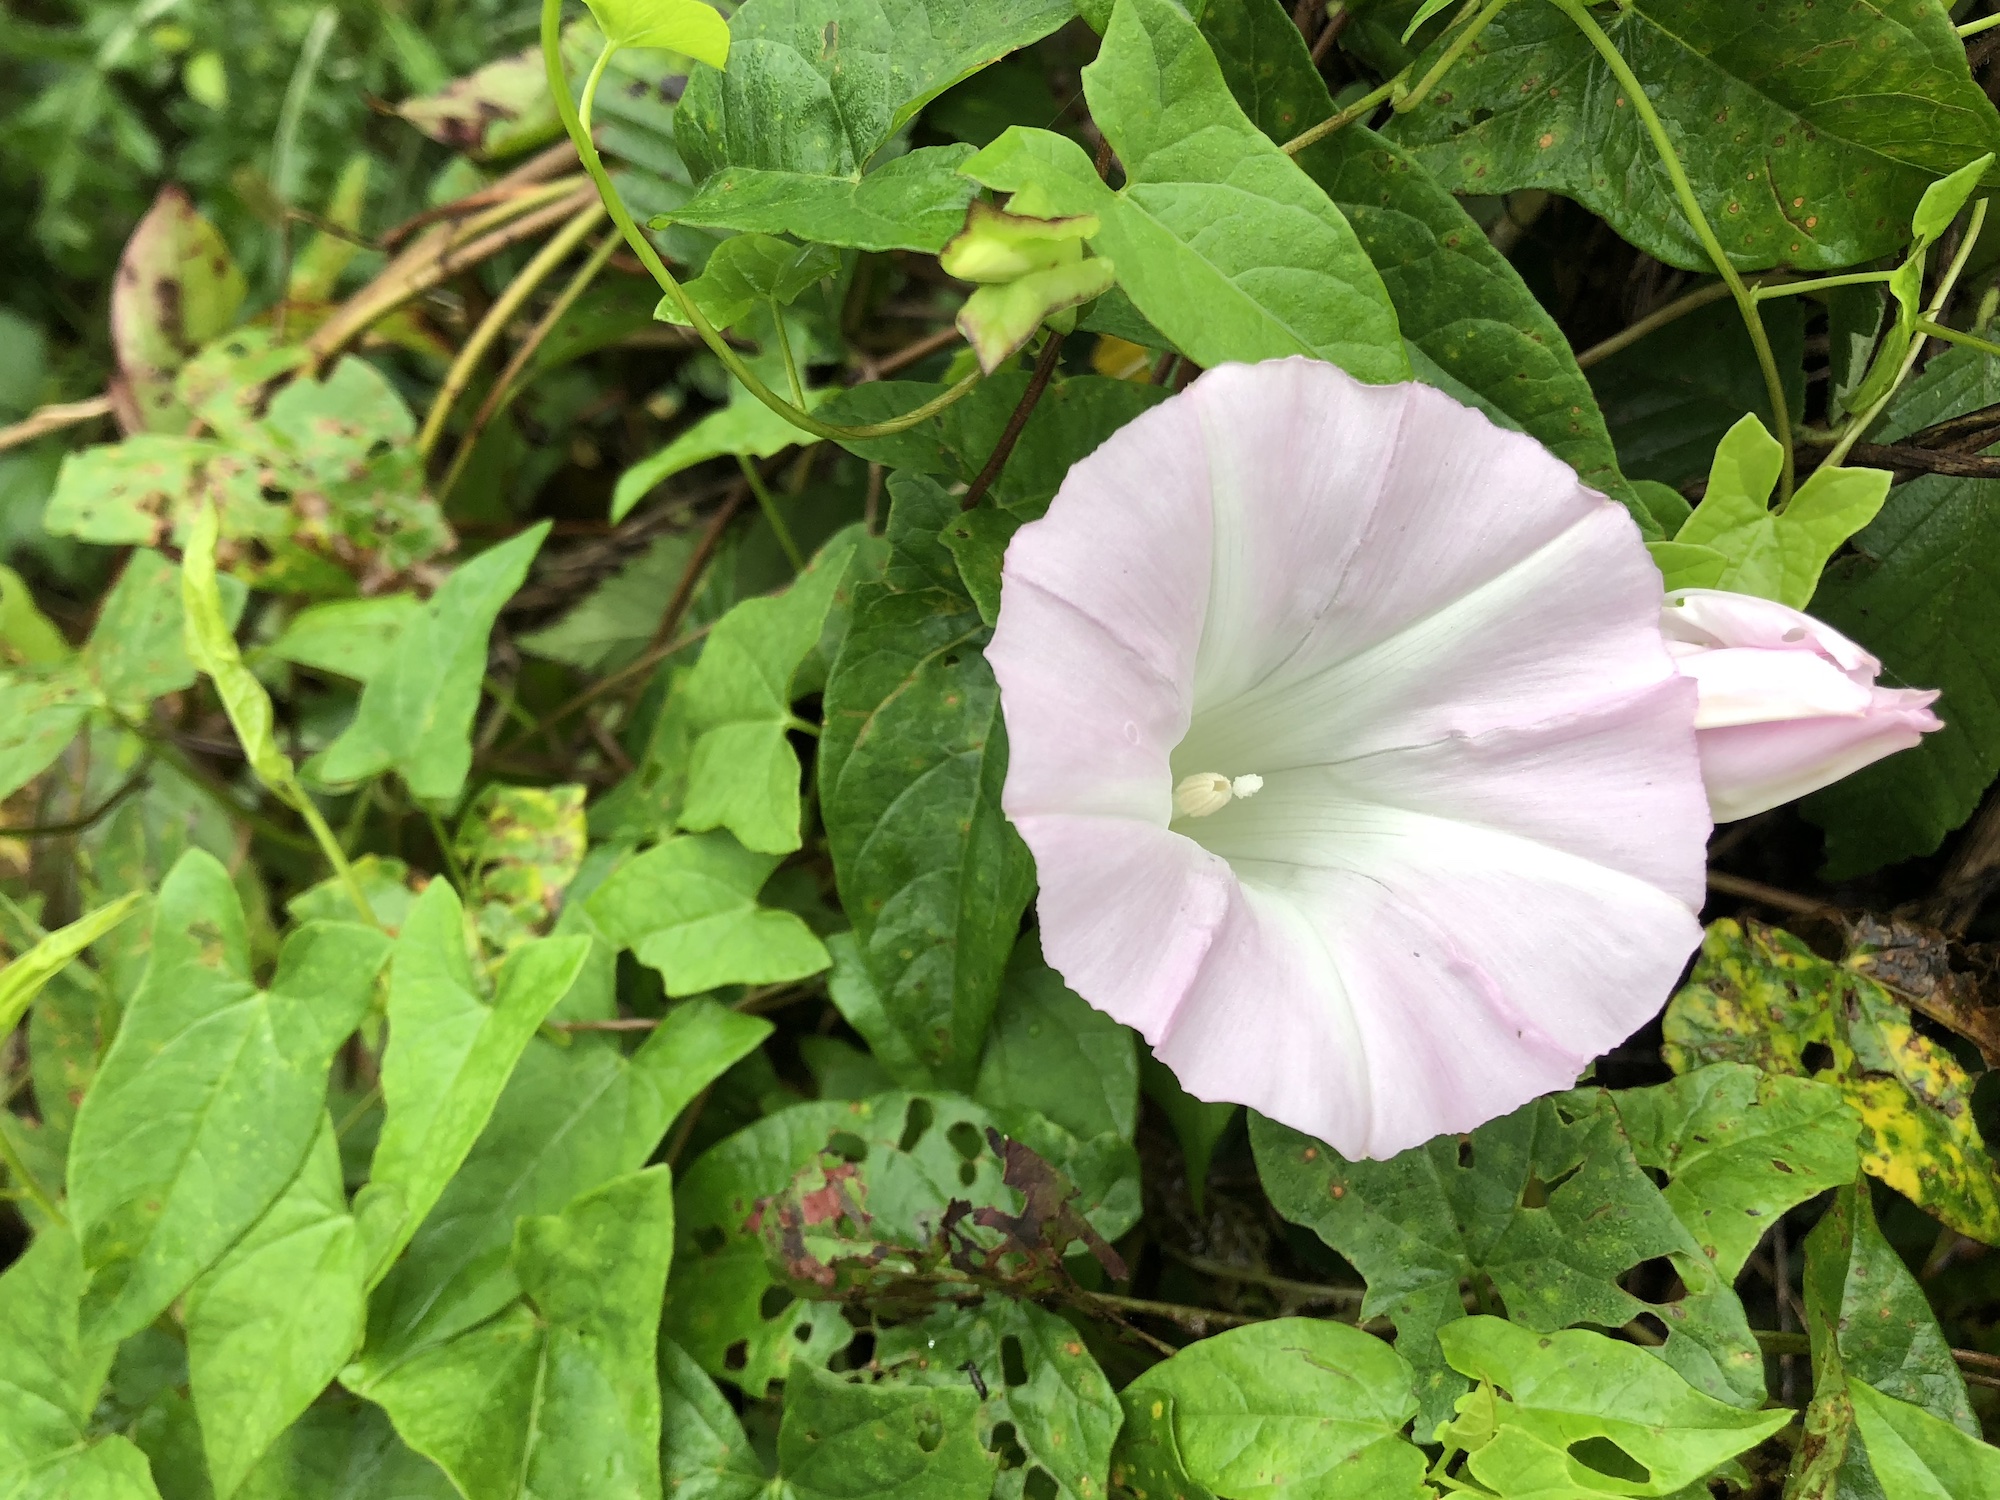 Hedge Bindweed on shore of Marion Dunn Pond in Madison, Wisconsin on September 3, 2018.